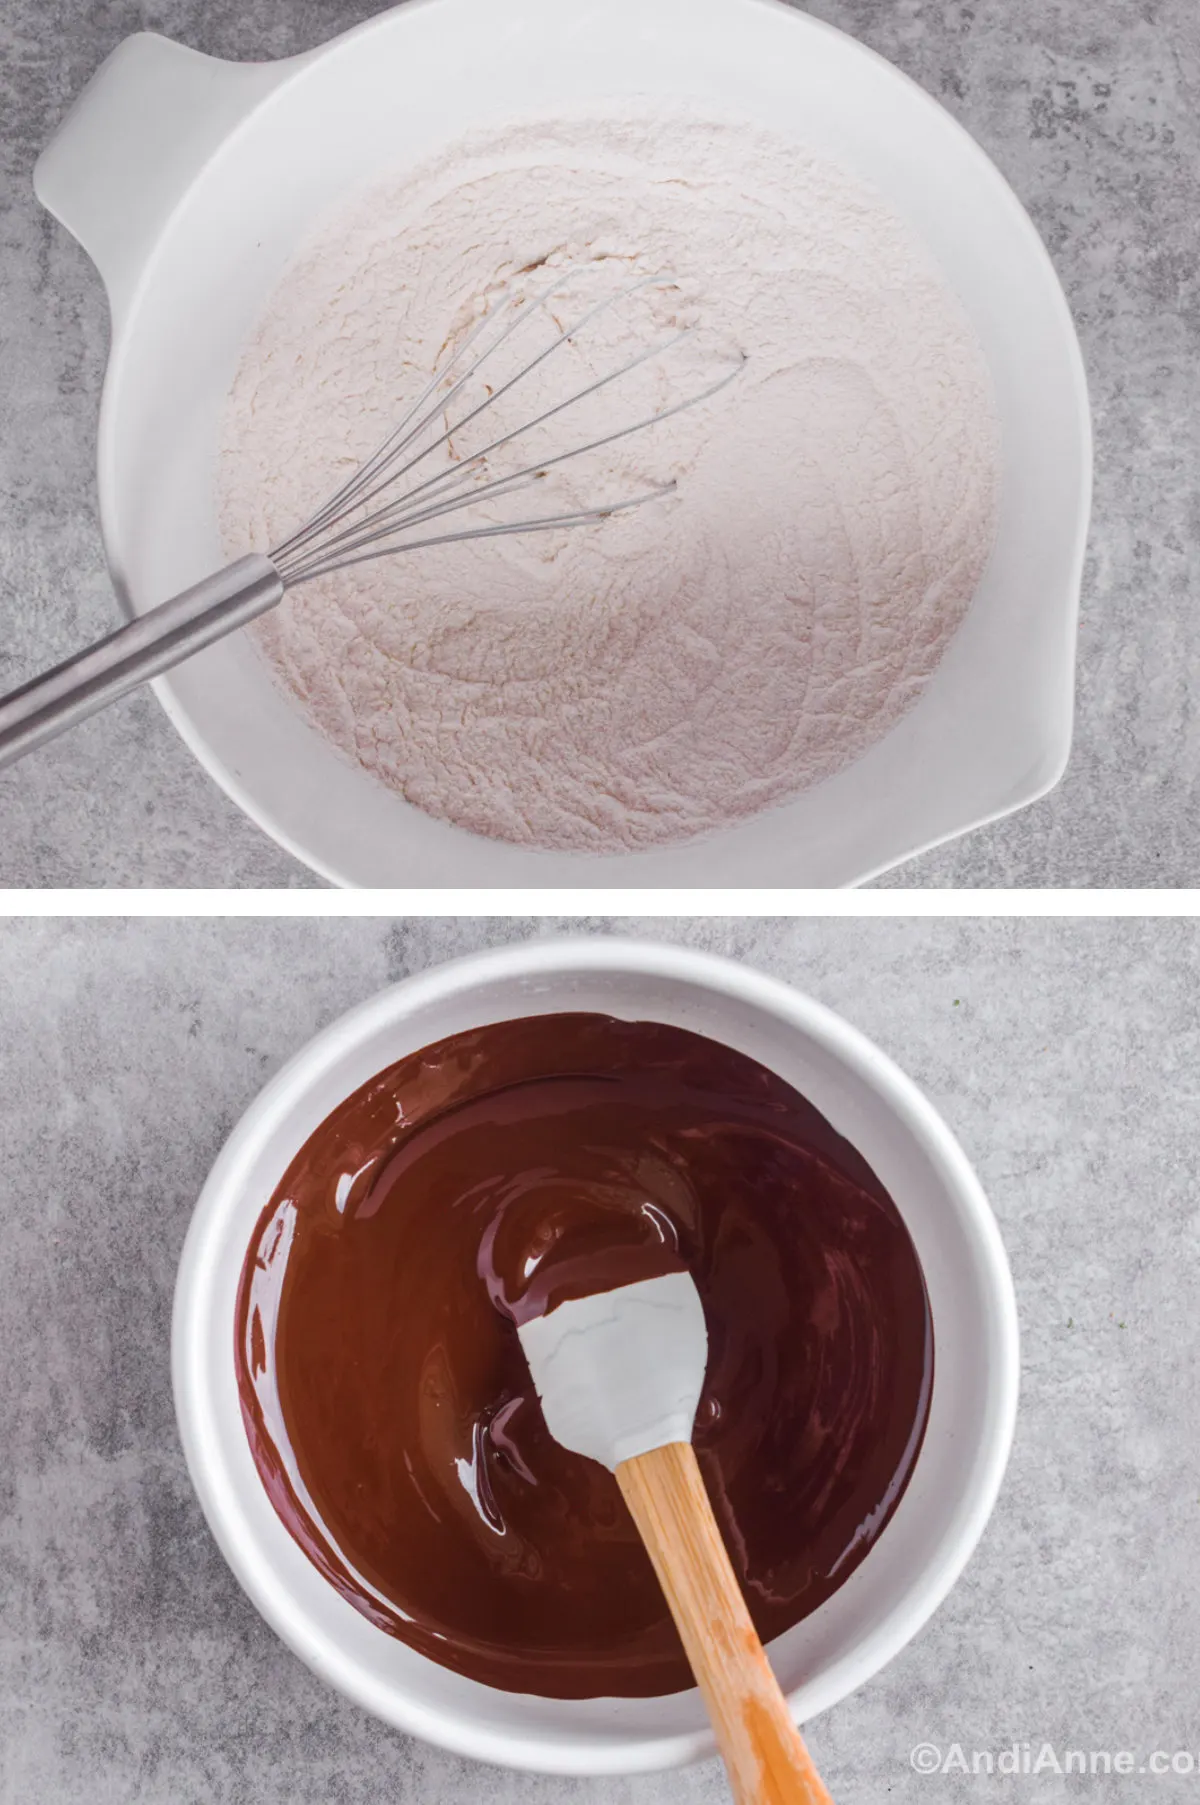 Two overhead images in one: 1. Dry ingredients mixed in a white bowl. 2. Bakers chocolate squares melted in a separate white bowl. 